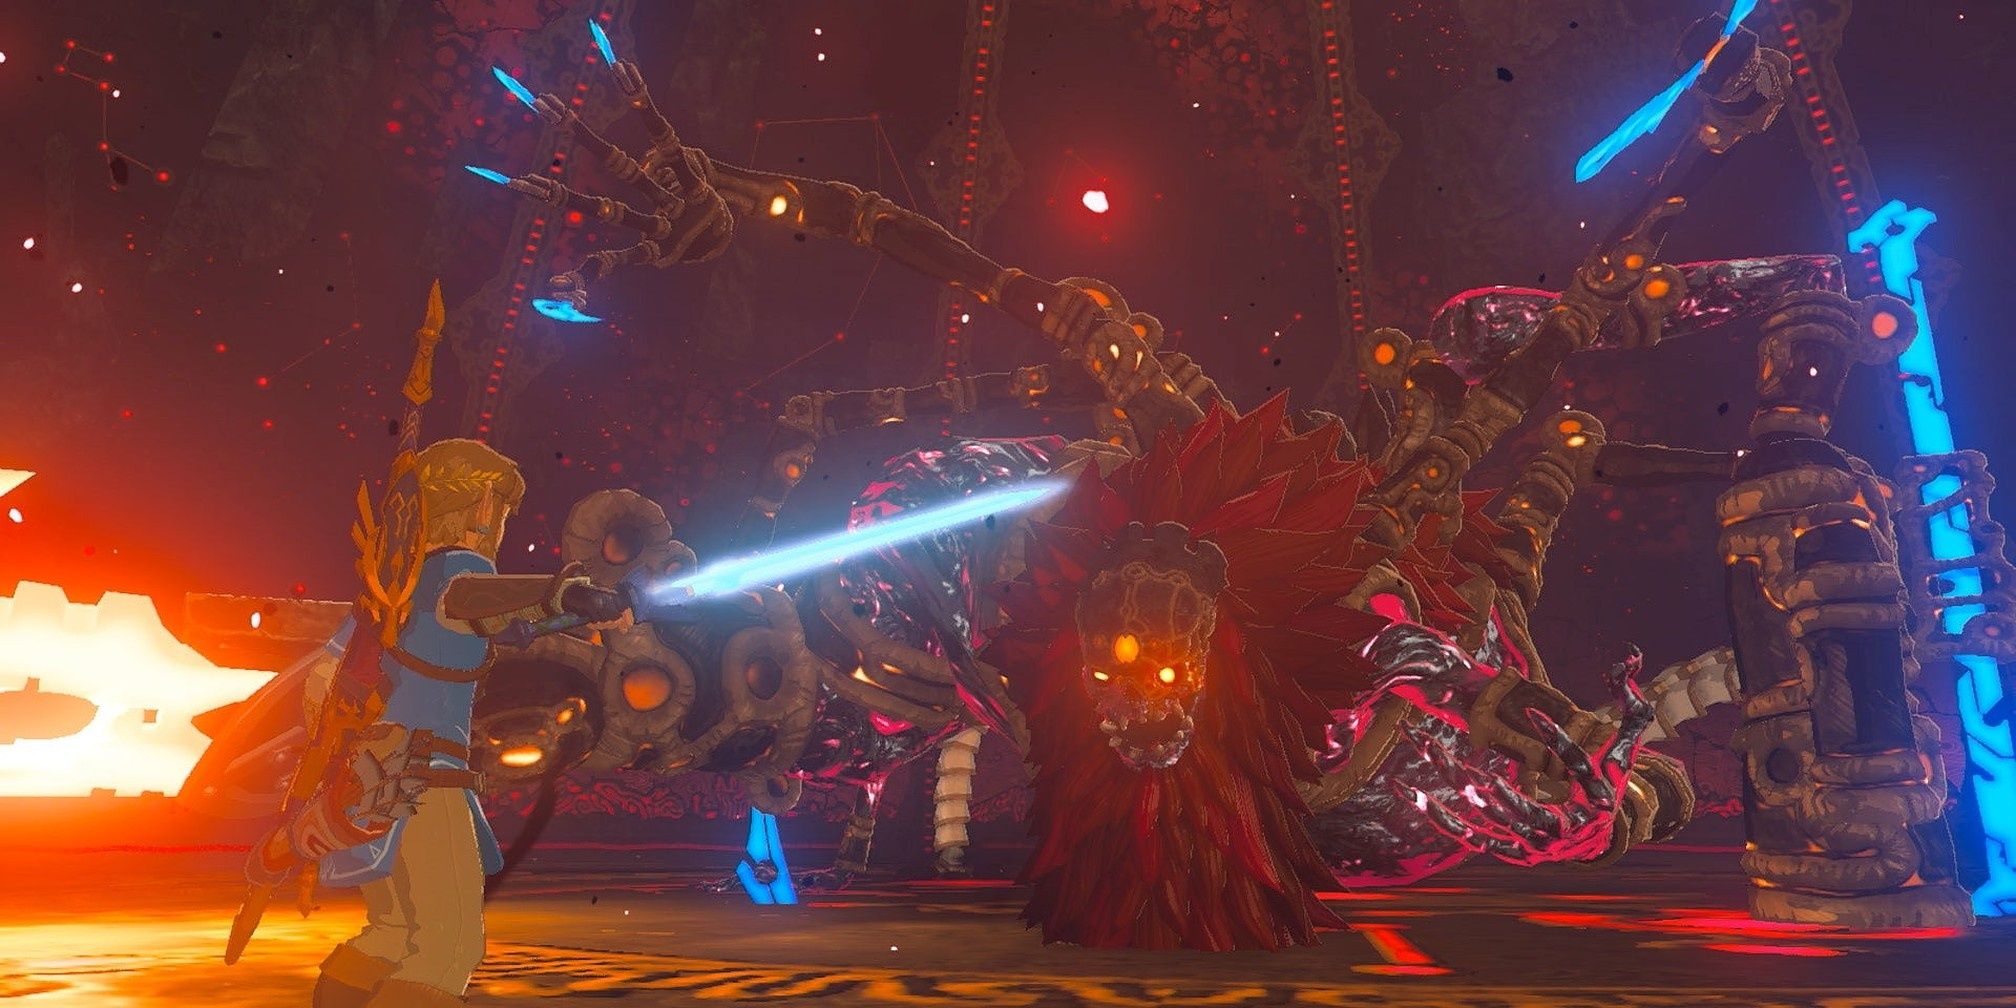 Calamity Ganon and Link facing each other prepared to attack